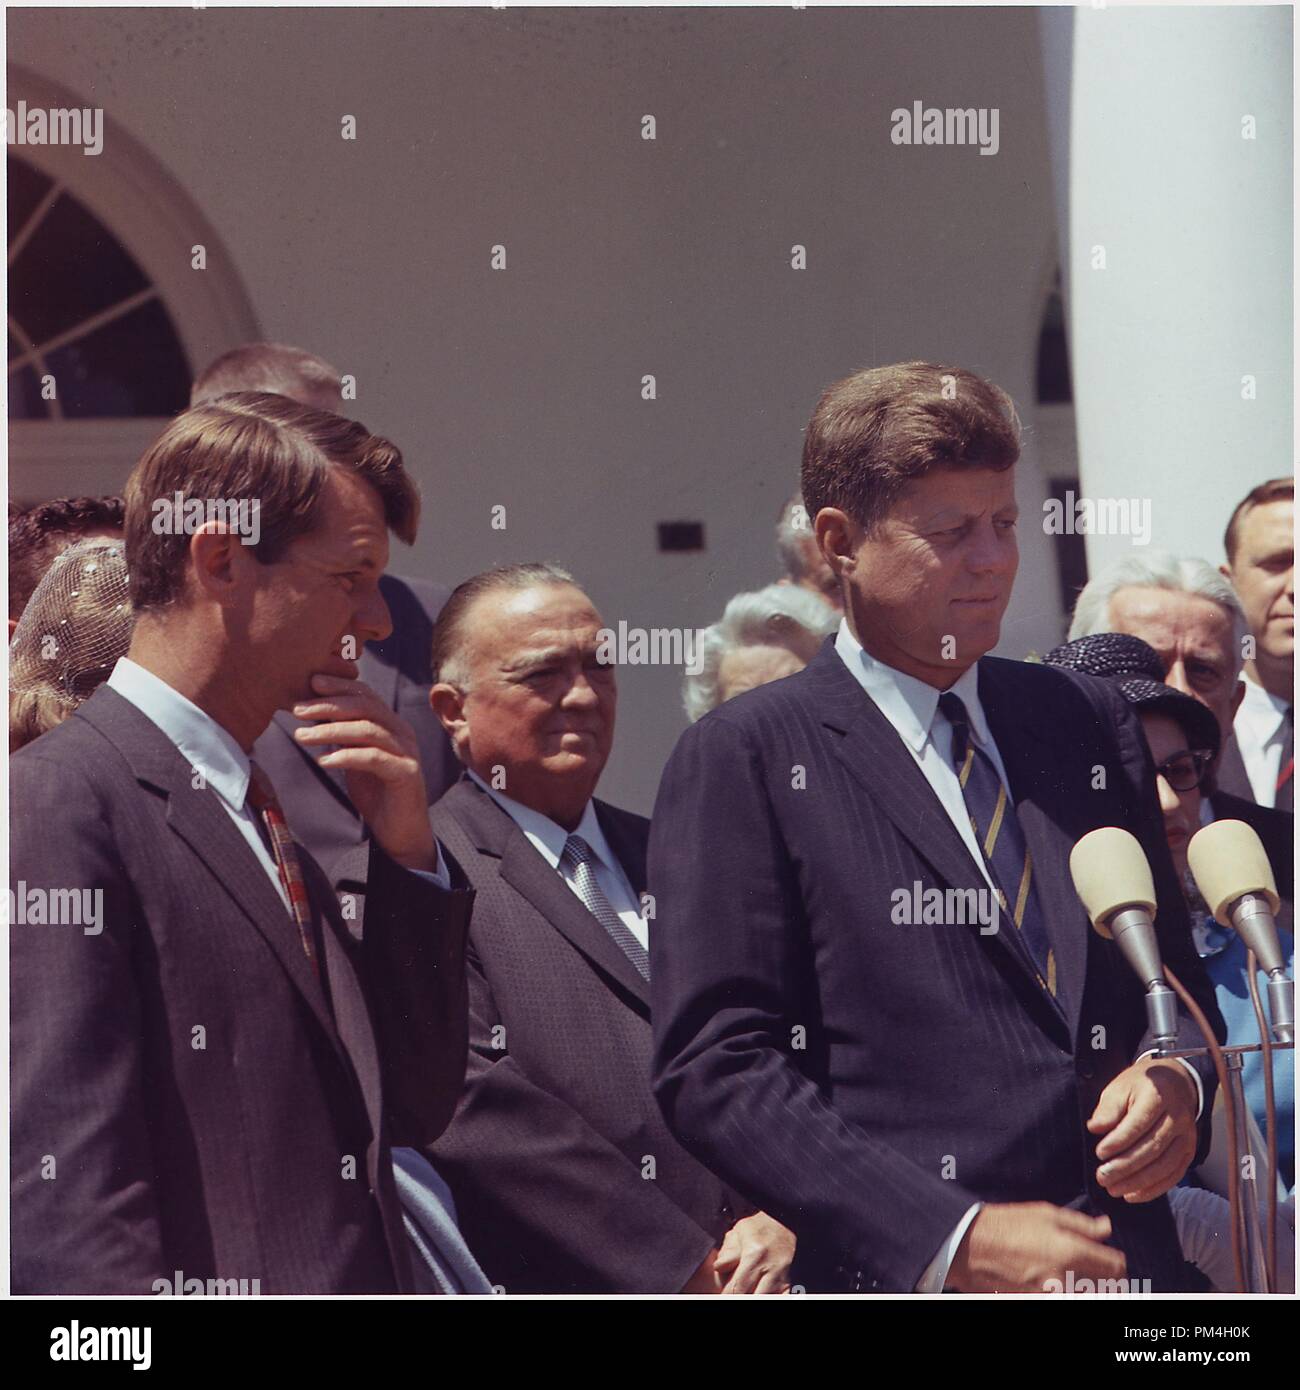 Presentation of the Young American Medals for Bravery. Attorney General Robert F. Kennedy, Director of F.B.I. J. Edgar Hoover, President John F. Kennedy, others. White House, Rose Garden, 7 May 1963     File Reference # 1003 165THA Stock Photo